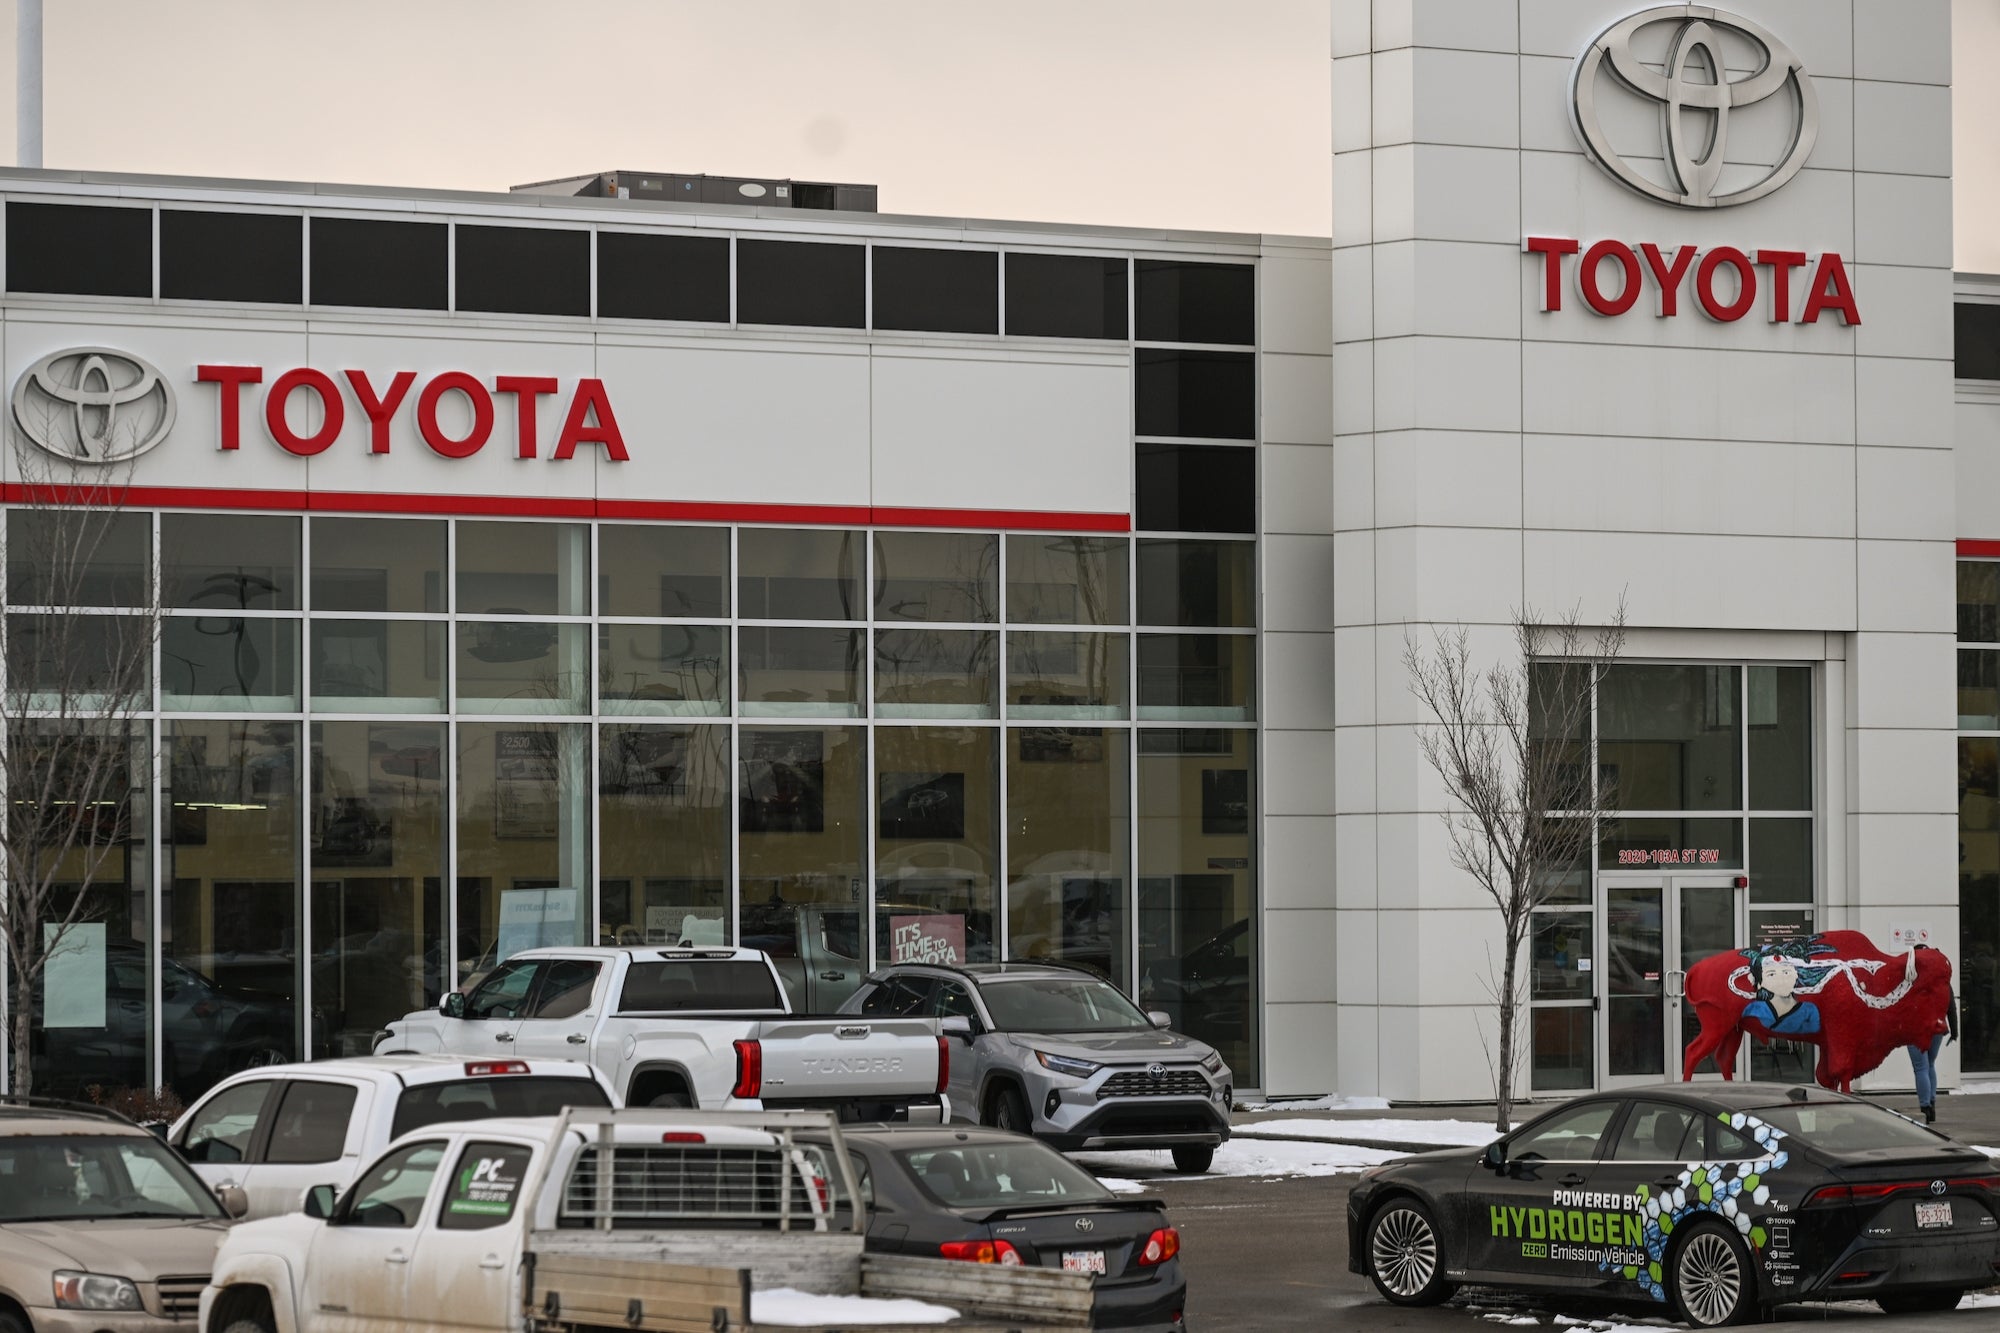 Toyota Loses Over $15 Billion in Market Price After Investigation